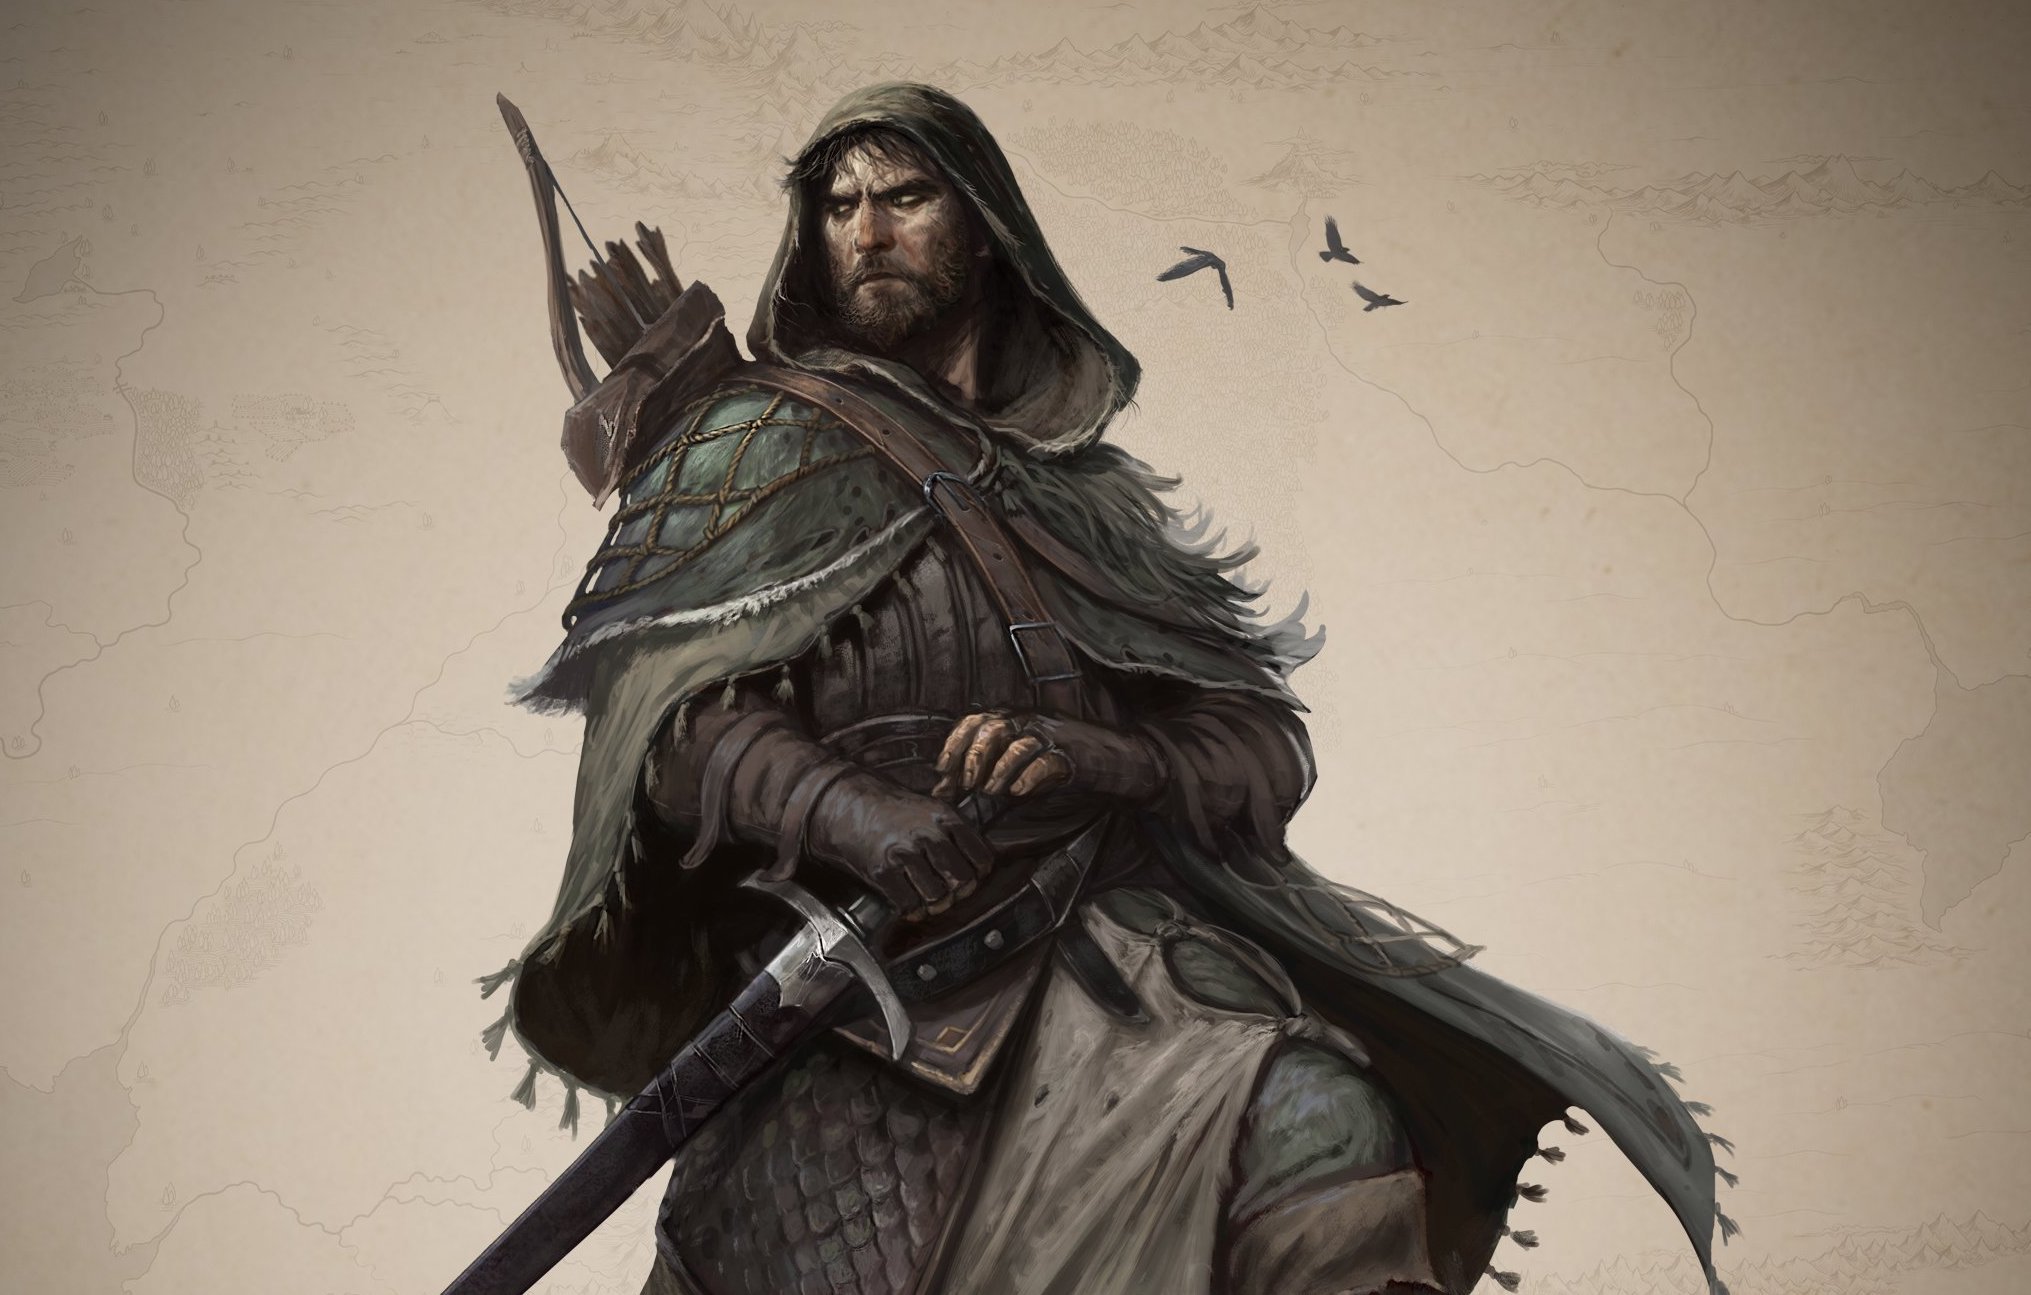 How To Build Aragorn From The Lord Of The Rings In D&D